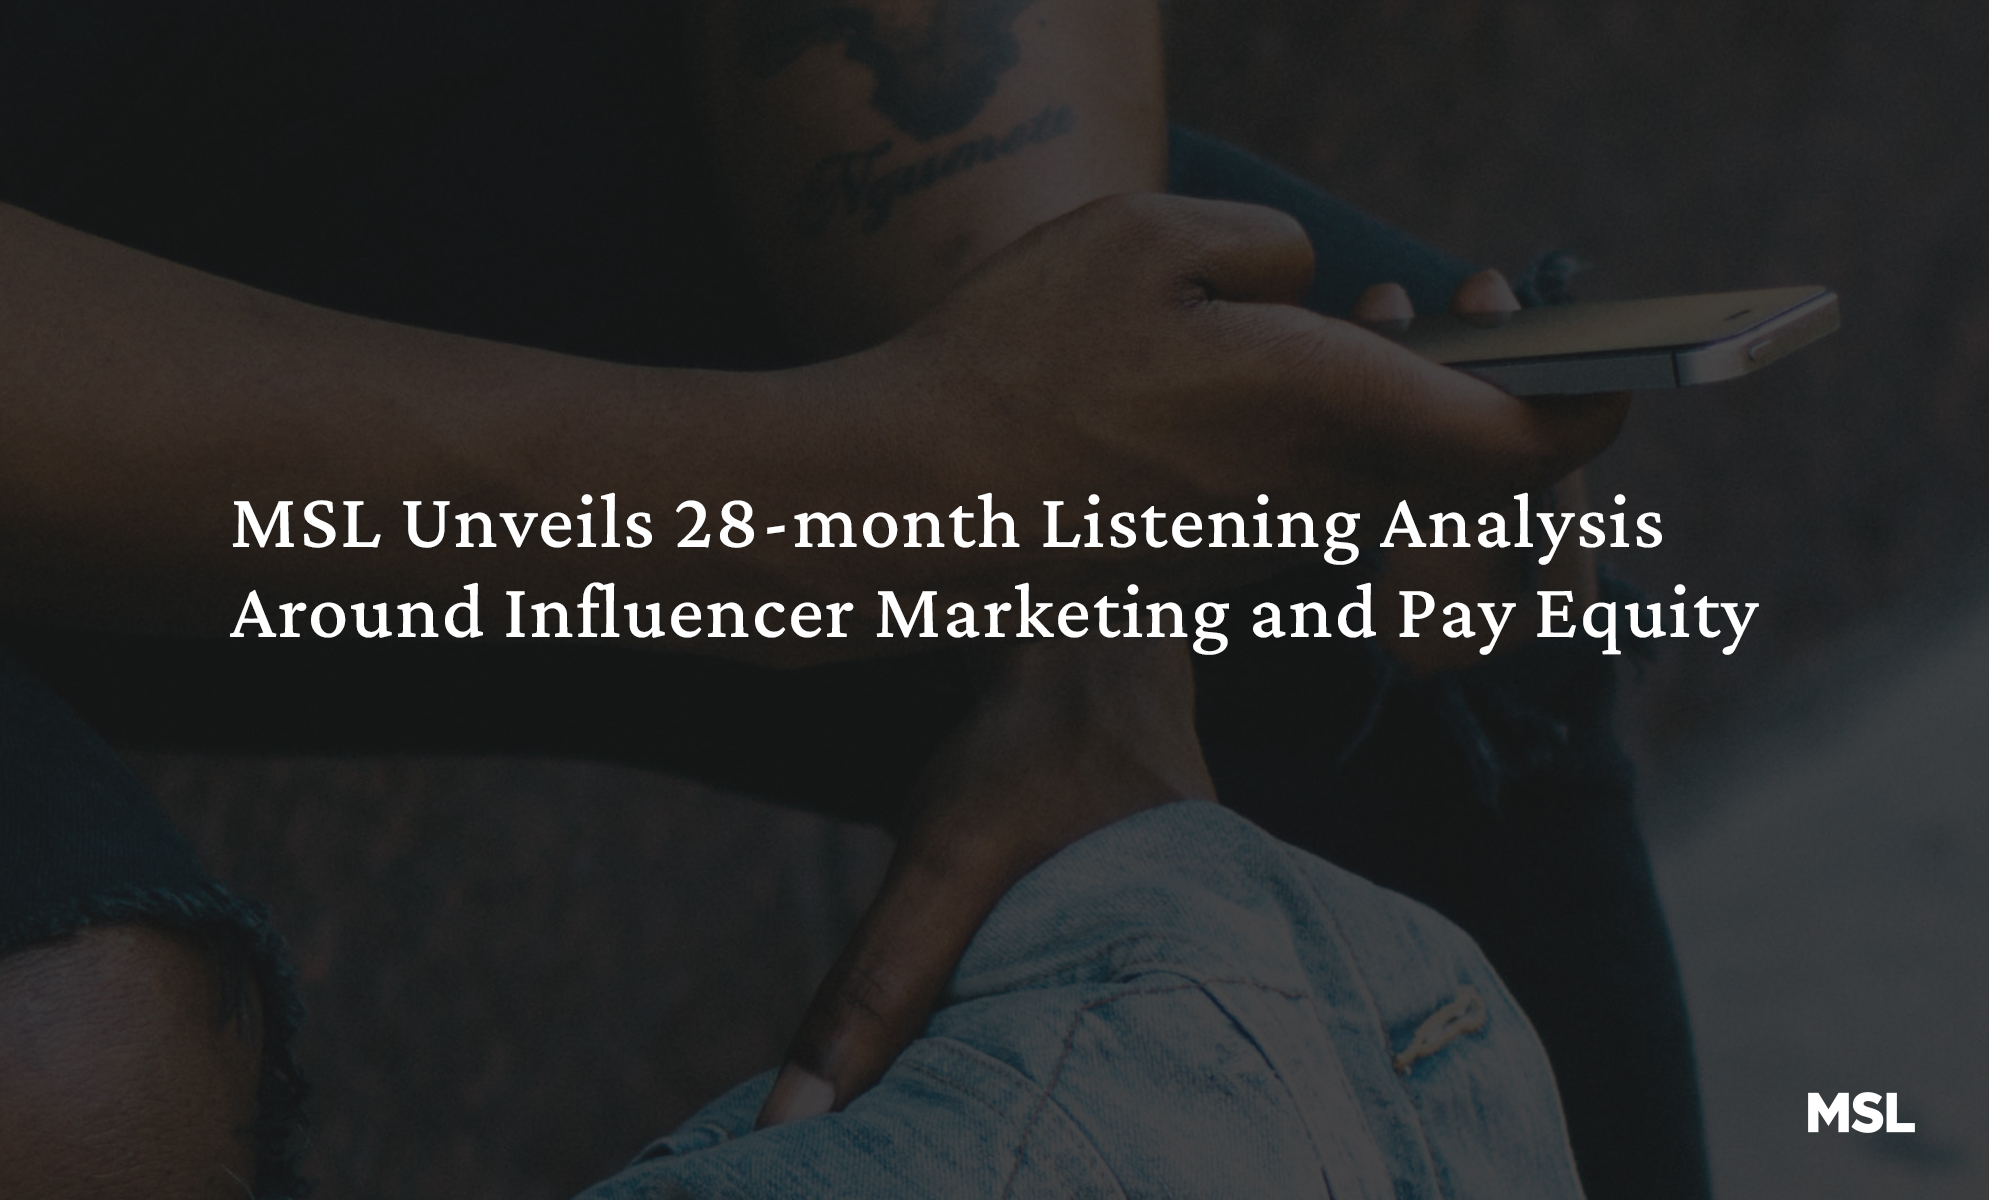 msl unveils 28-month listening analysis around influencer marketing and pay equity